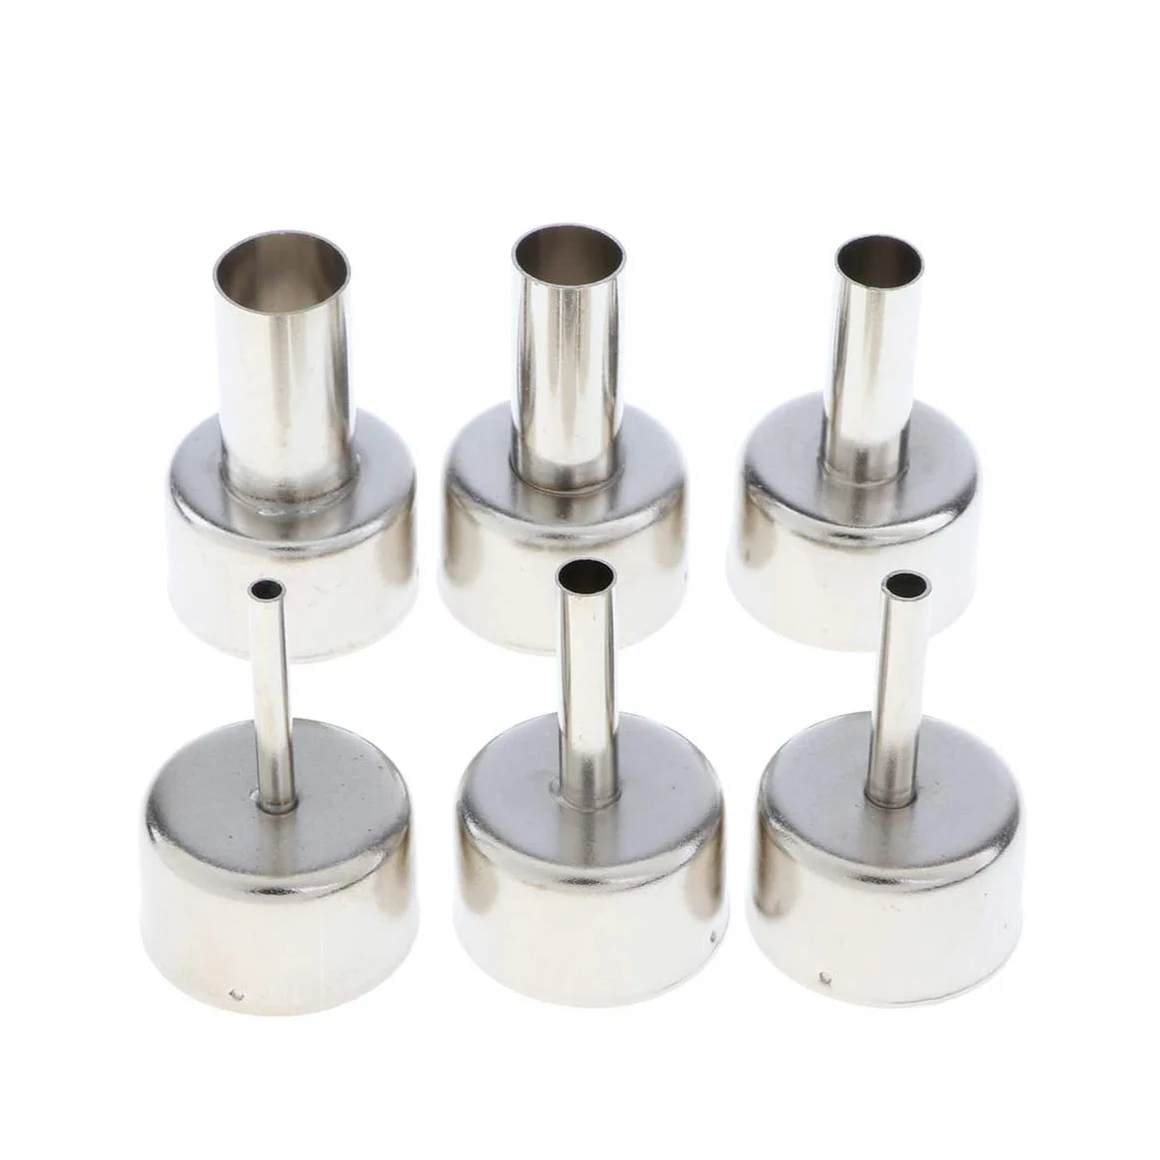 

6 PCS 858 Universal Hot Air Nozzle Round Mouth Nozzle for Air Pump Type Hot Air Desoldering Station Accessories